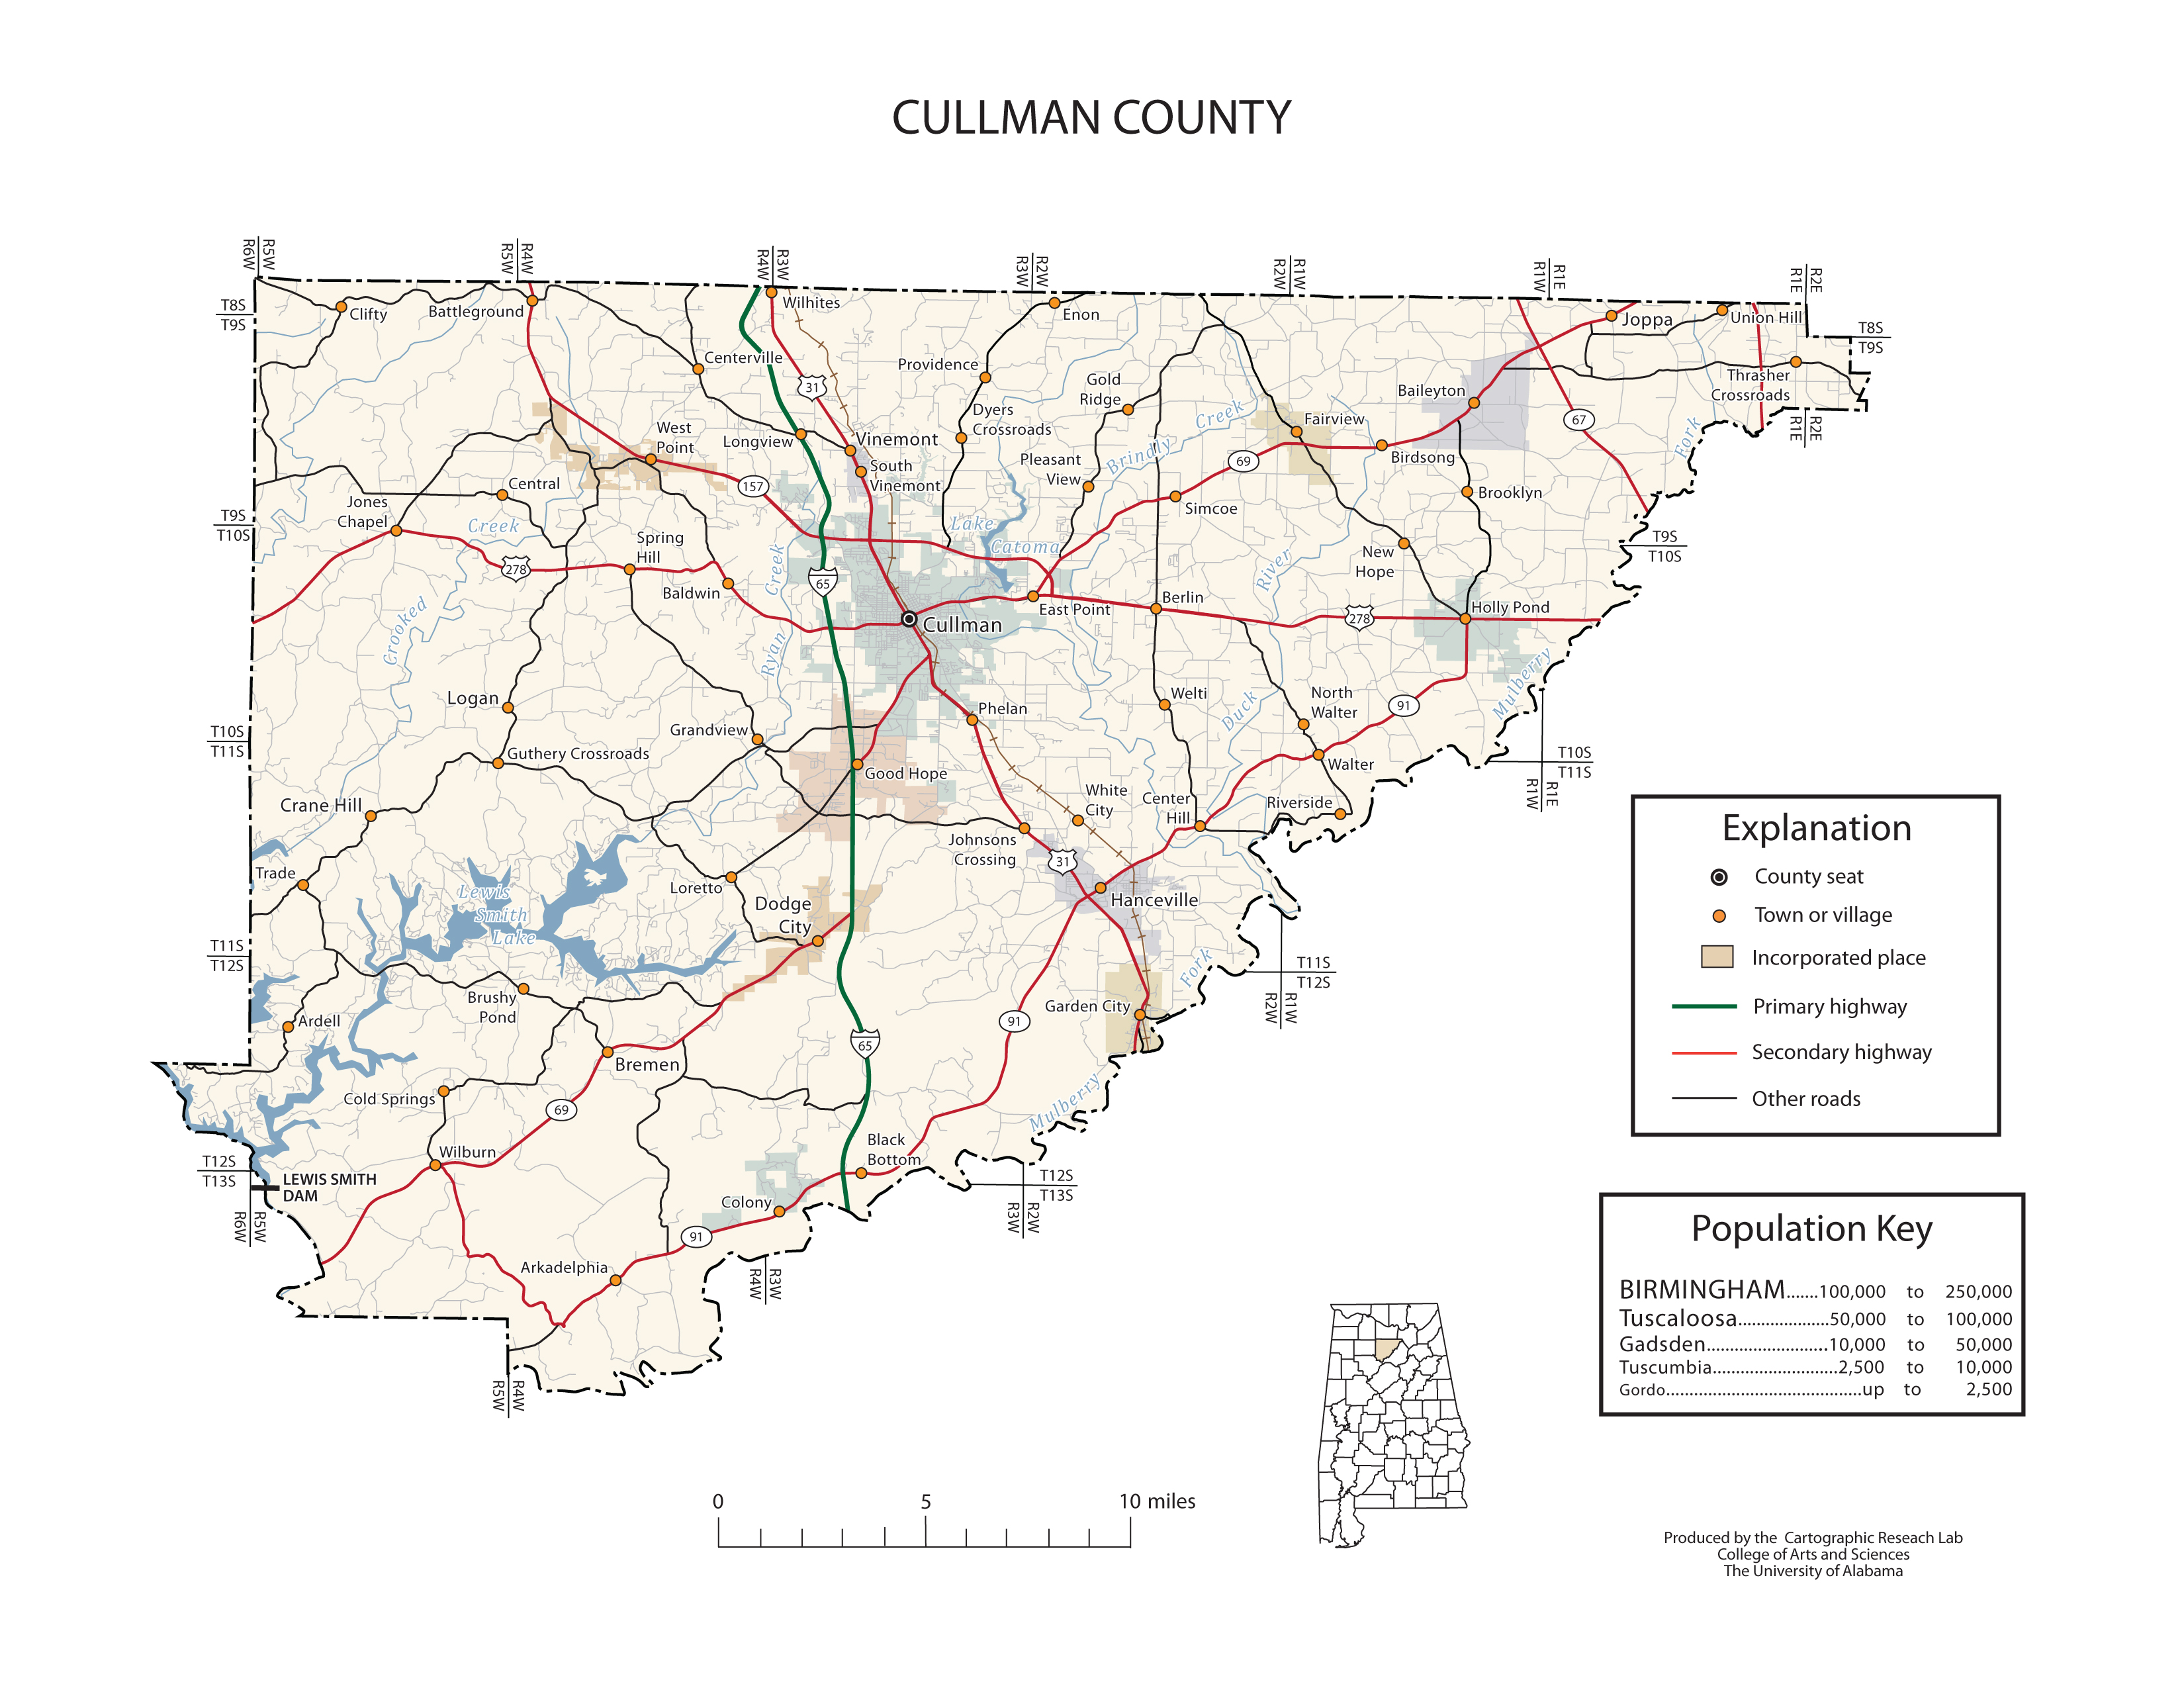 Maps of Cullman County